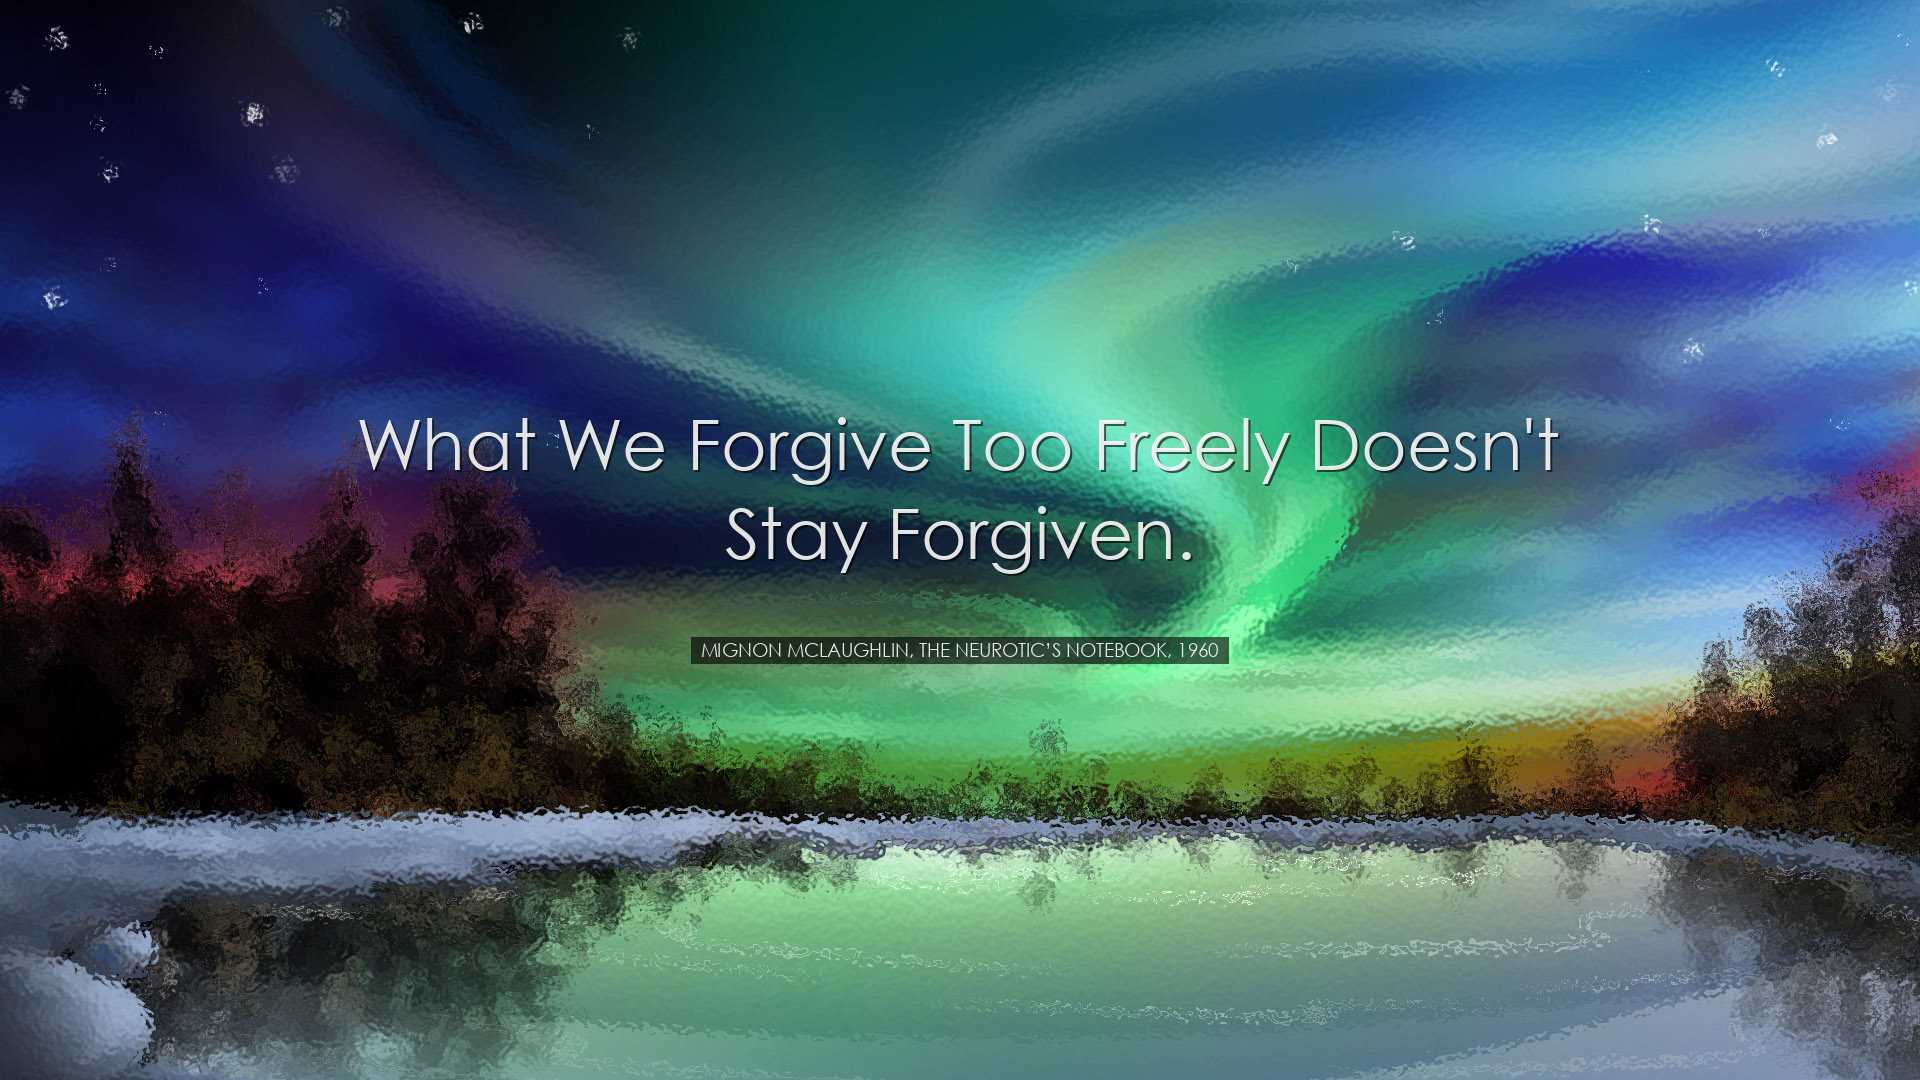 What we forgive too freely doesn't stay forgiven. - Mignon McLaugh